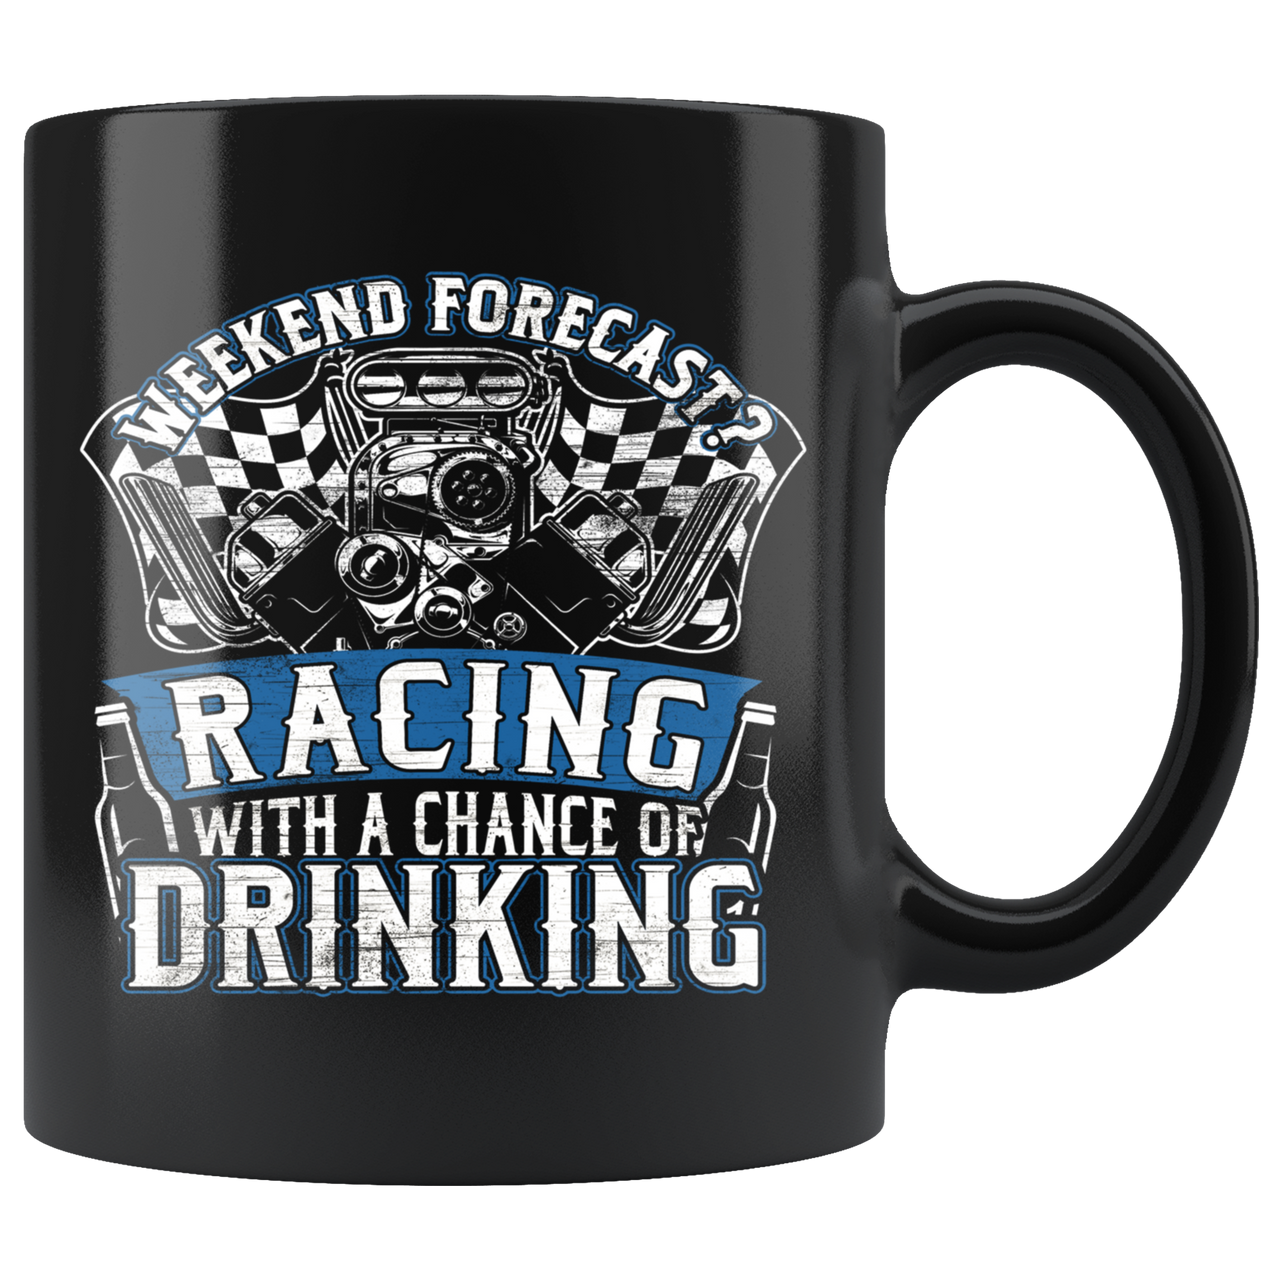 Weekend Forecast Racing With A Chance Of Drinking Mug!